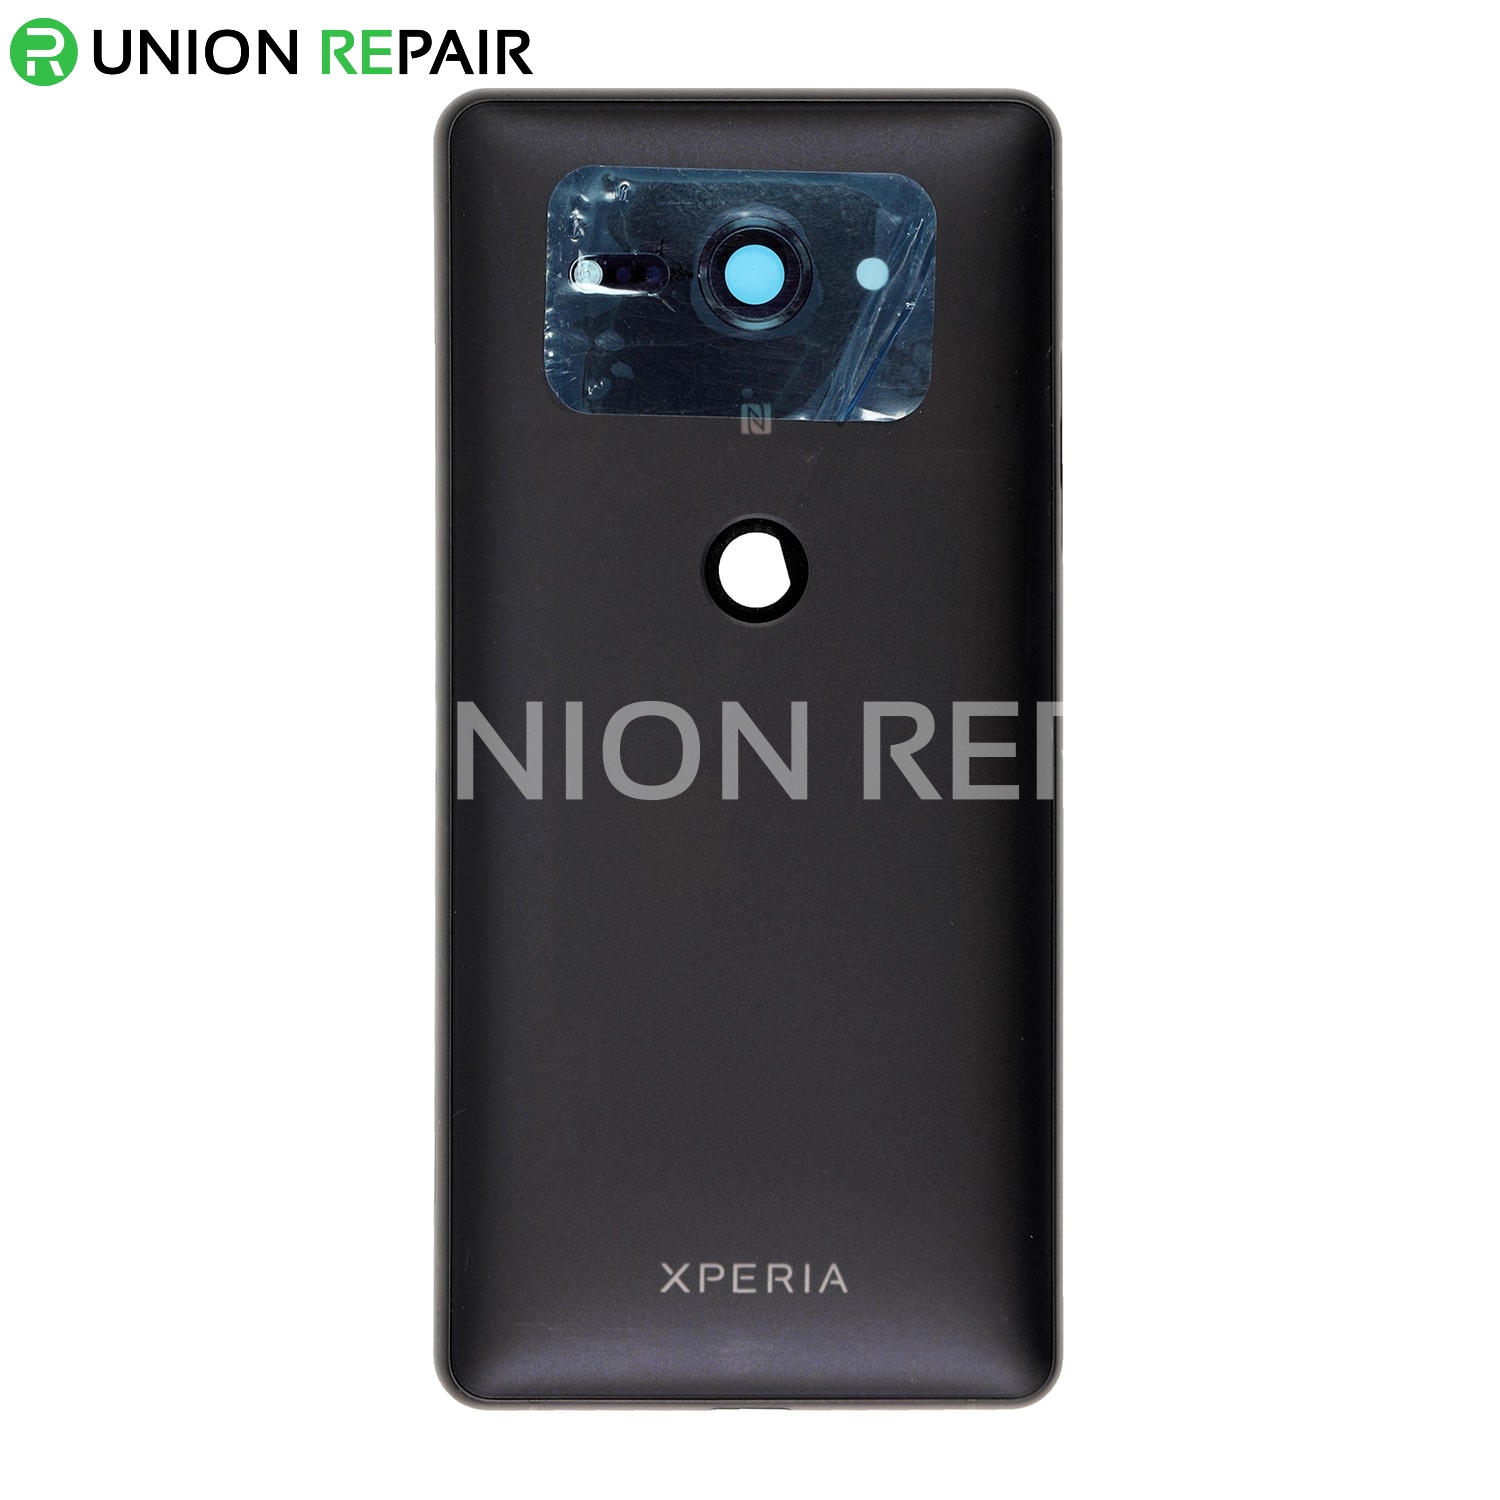 Replacement for Xperia XZ2 Compact Back Cover - Black